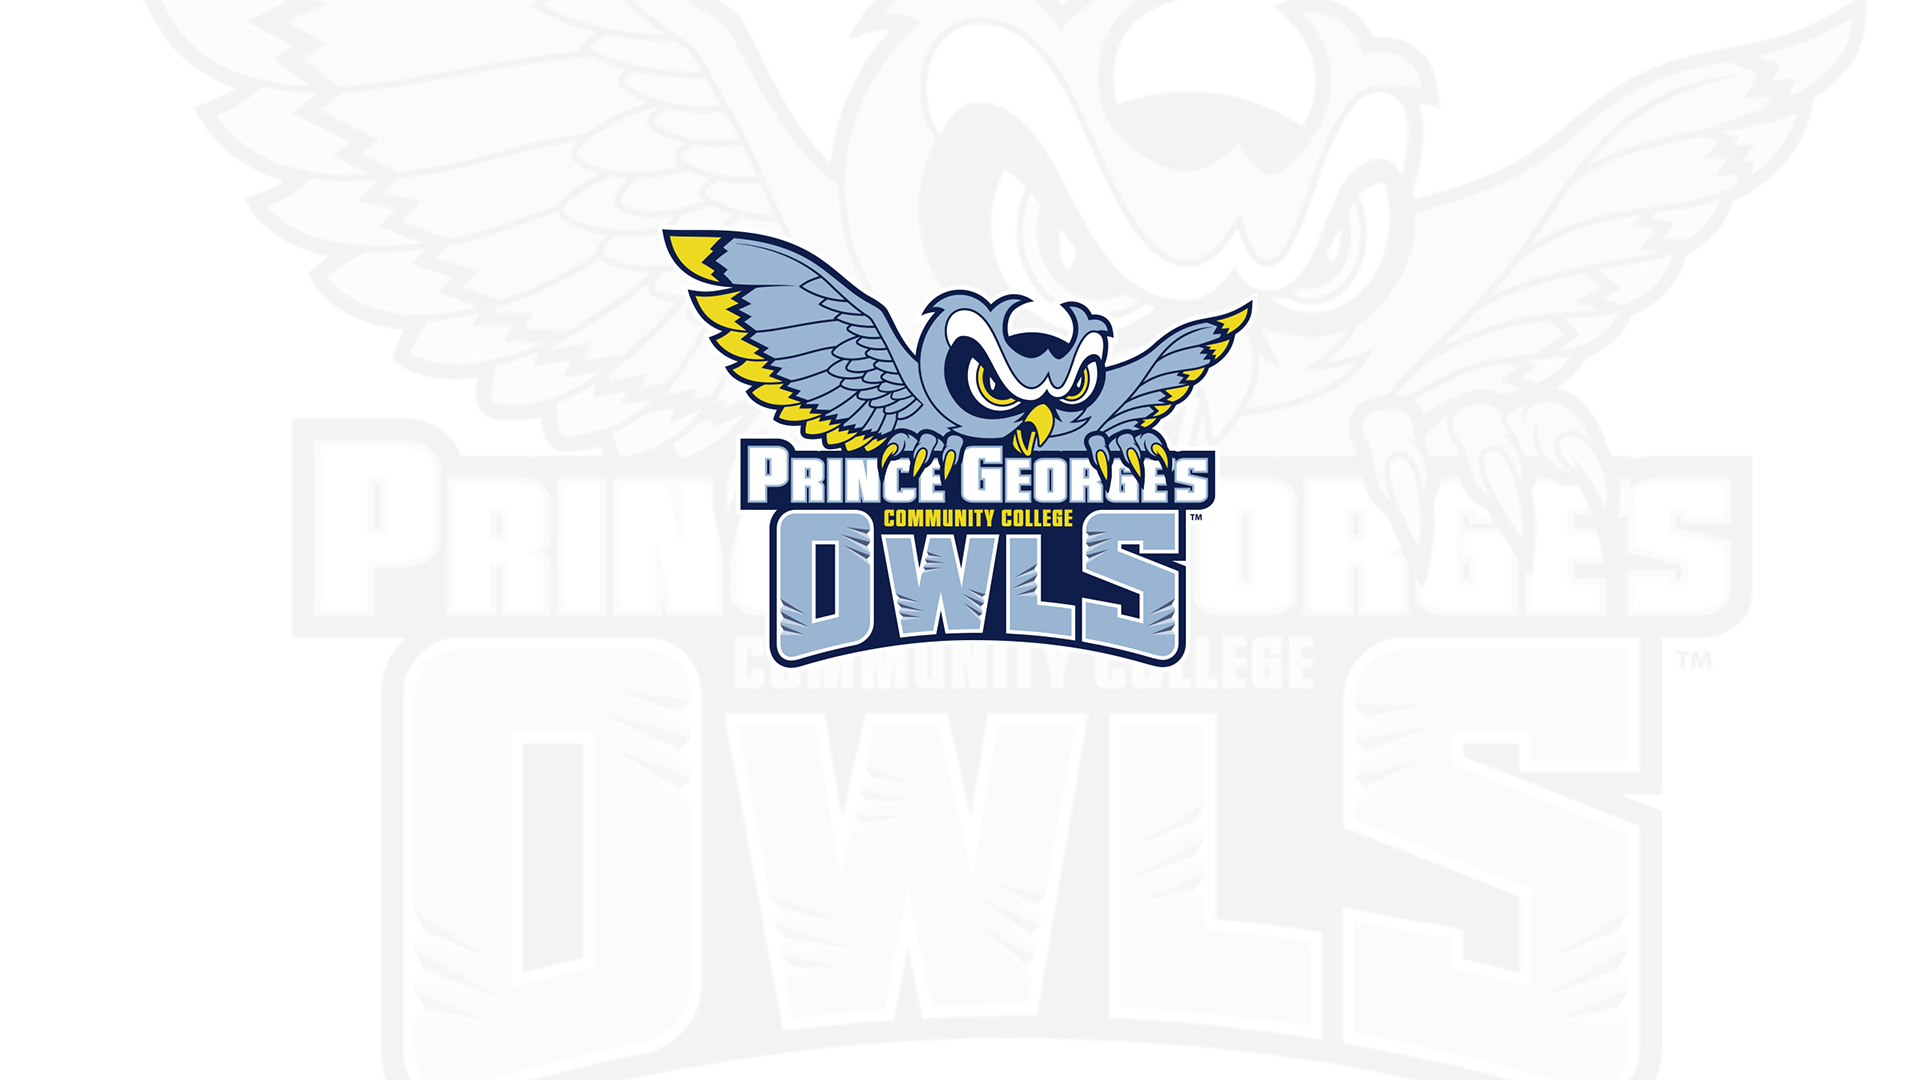 Andjalepou Wins 800m Run And Foday Takes 100m Dash To Lead Prince George's Track And Field At Bowie State Bulldog Classic